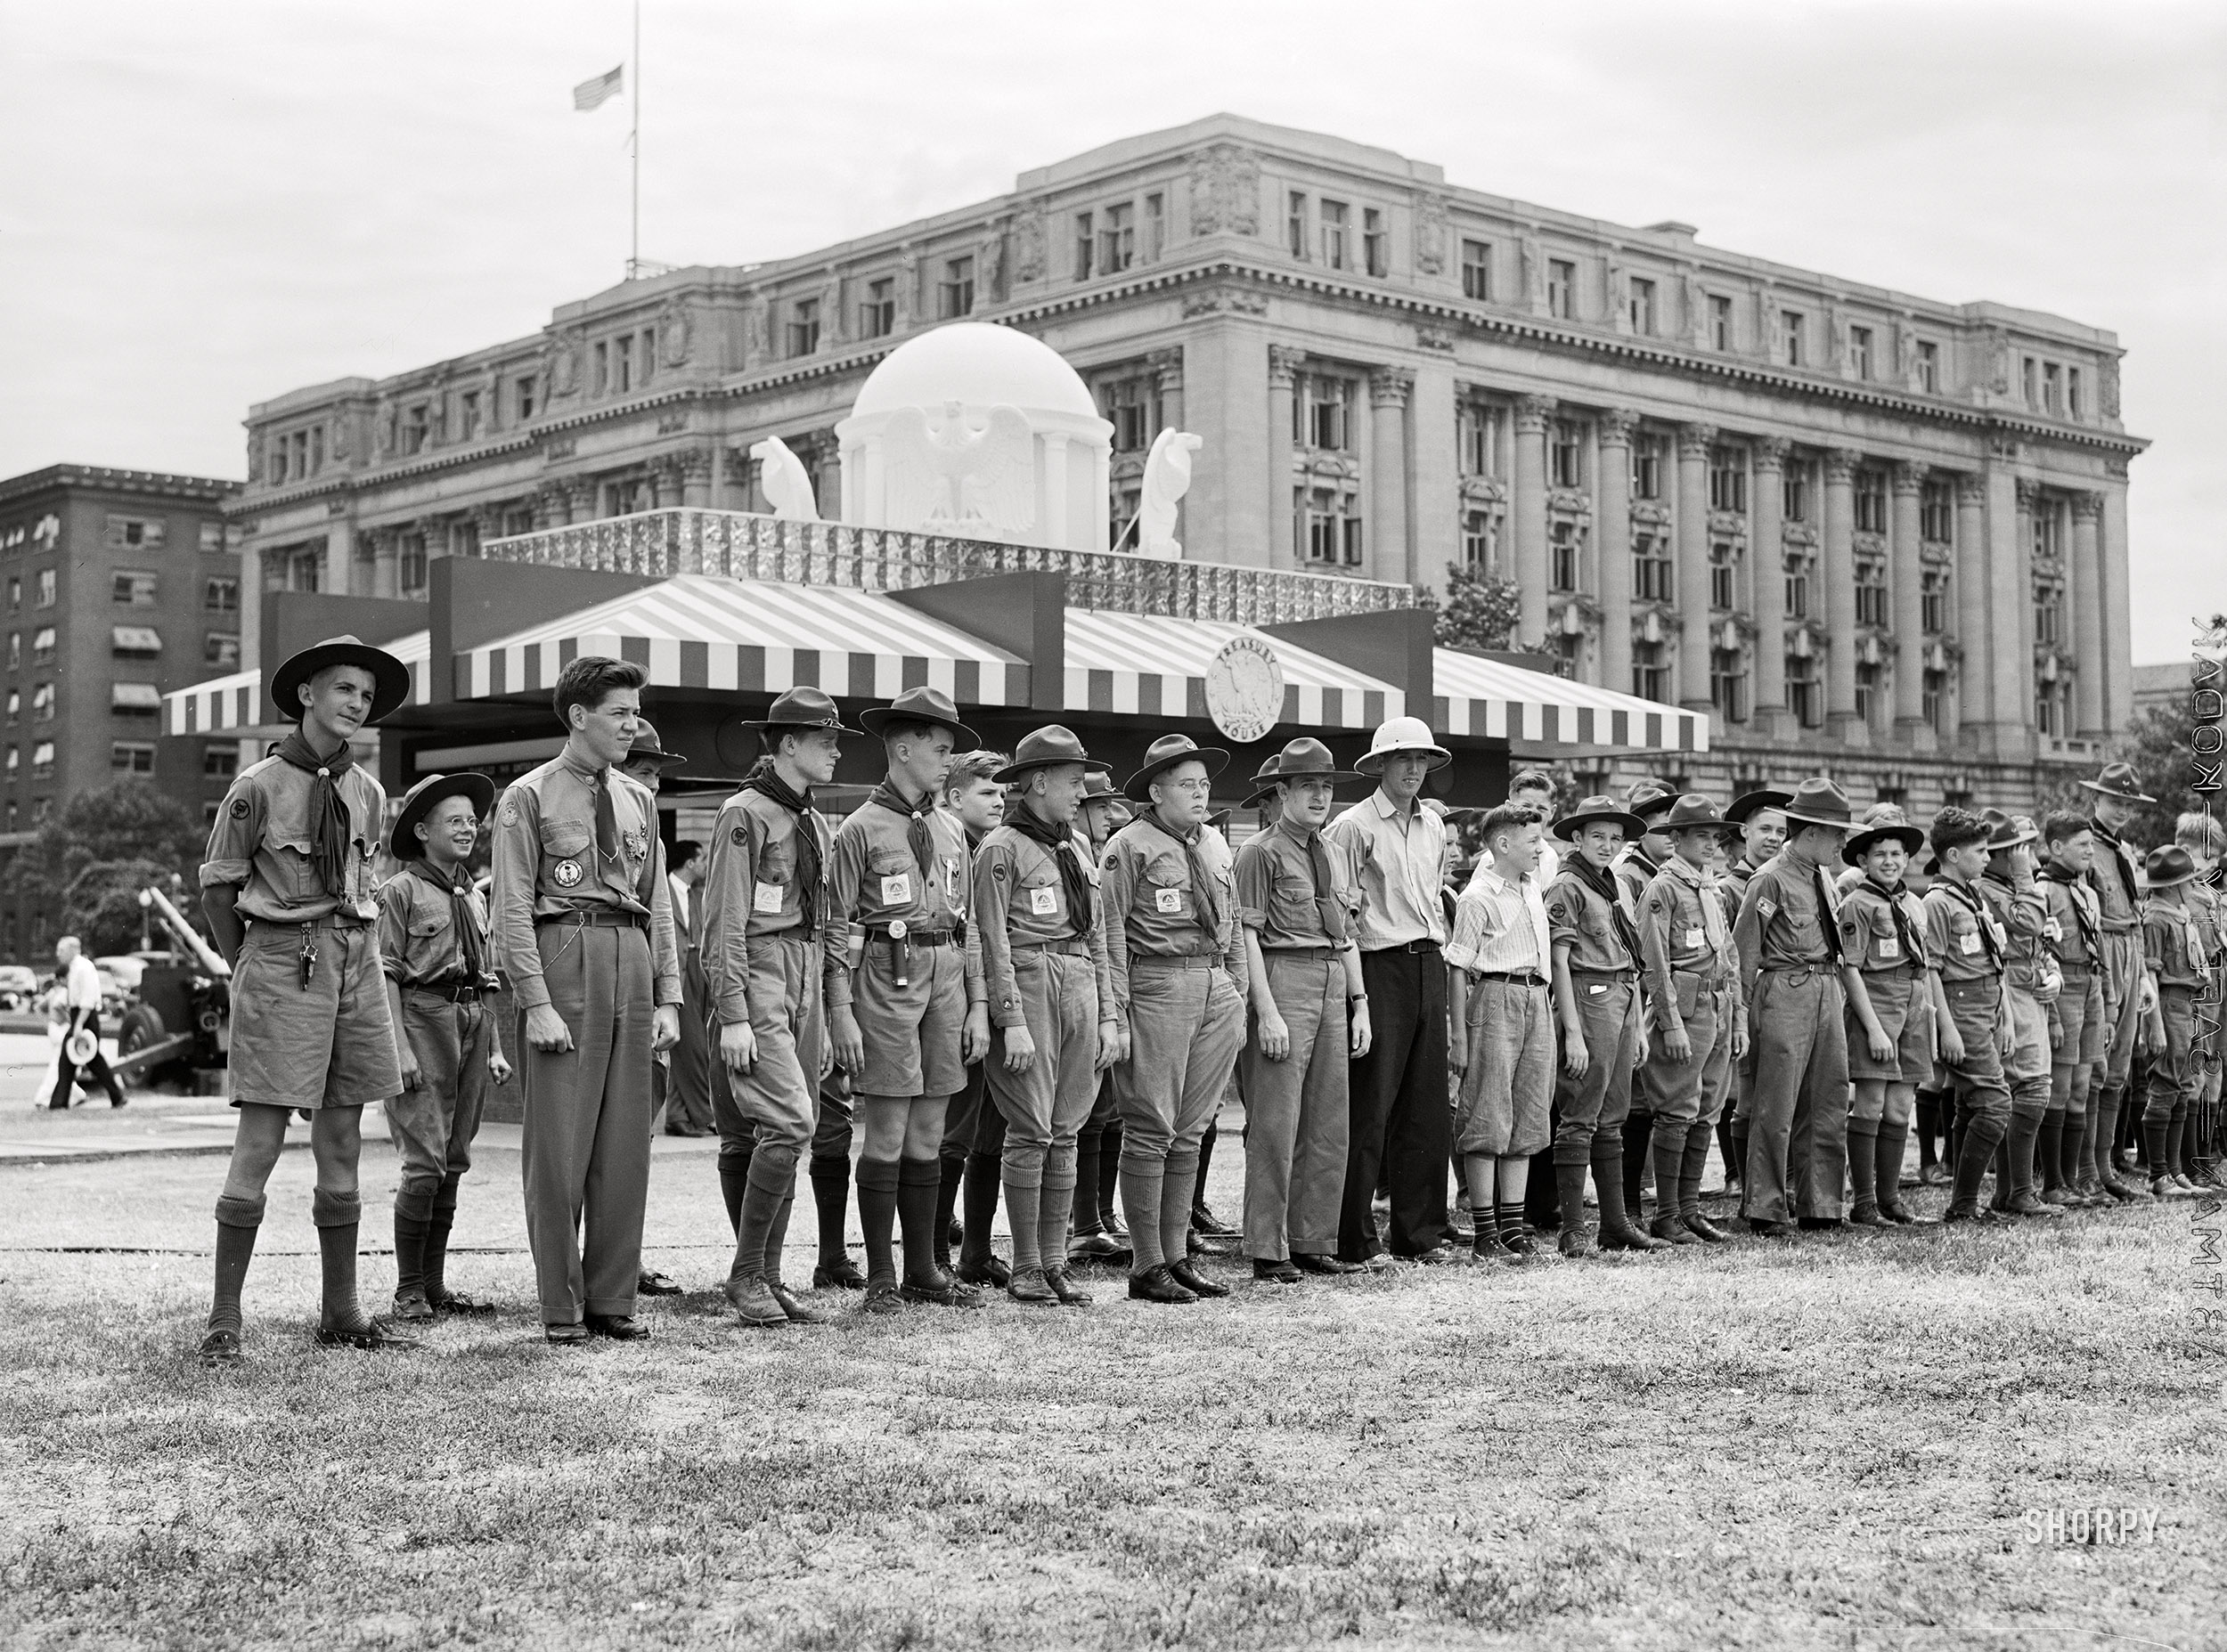 July 1941. "Boy Scouts inspecting and learning about Army equipment in Commerce Square, Washington, D.C." Acetate negative by Marion Post Wolcott. View full size.